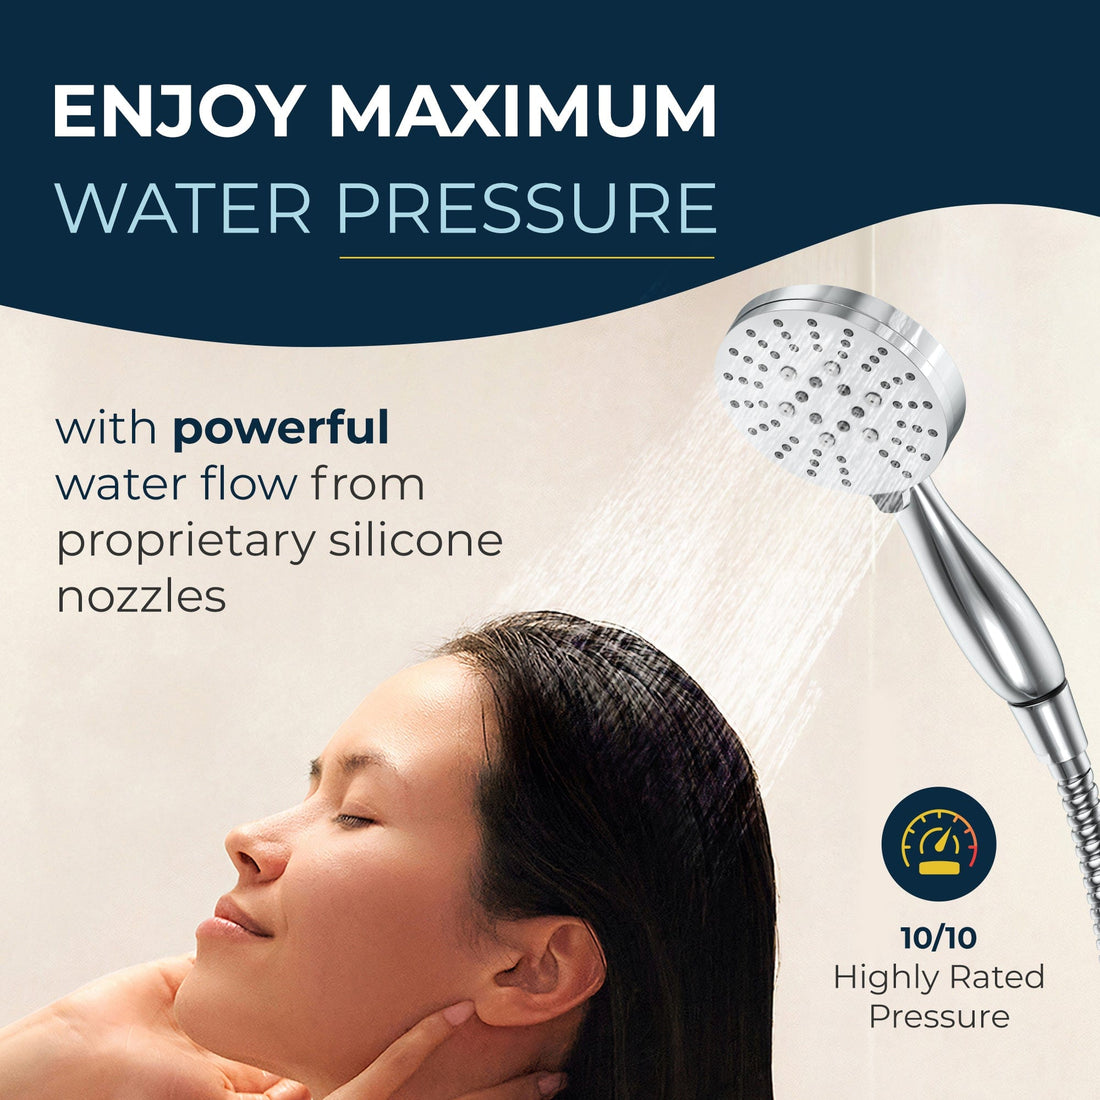 Maximum Water Pressure 3 Spray Settings for Handheld Shower Head Massage Wide and Mist Spray 2.5 / Chrome - The Shower Head Store